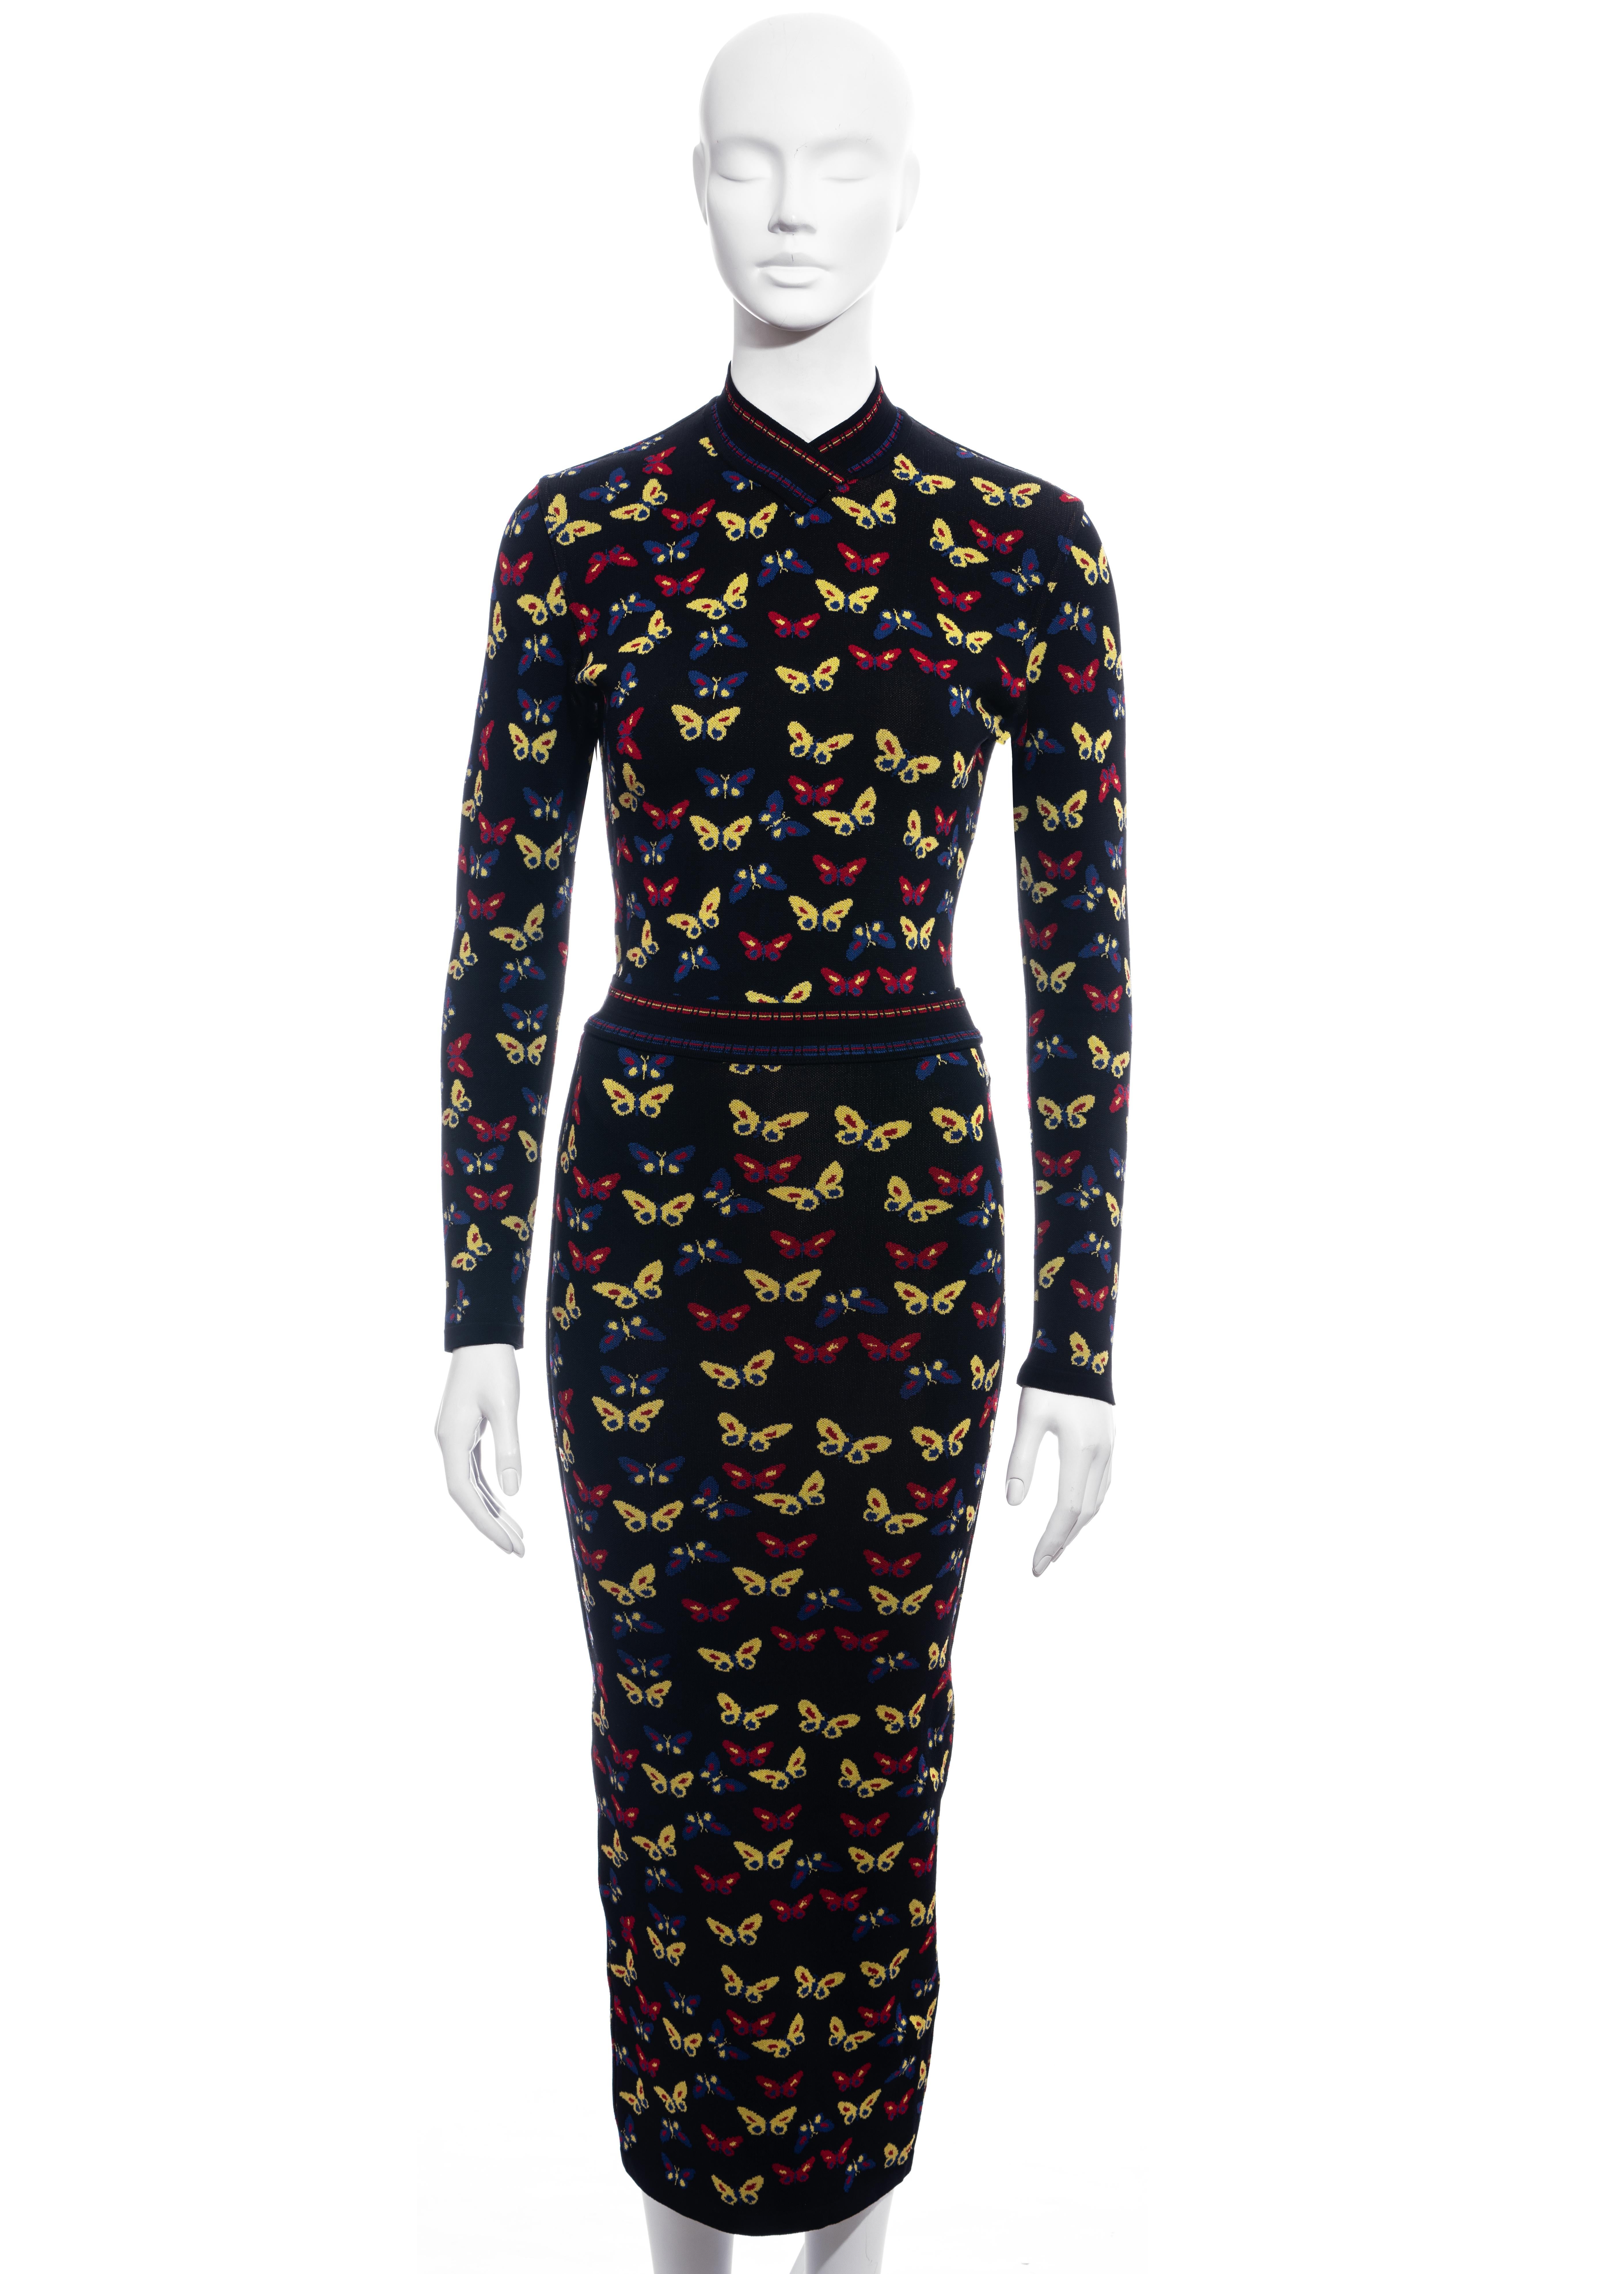 ▪ Azzedine Alaia butterfly two-piece dress
▪ 90% Viscose, 6% Nylon, 4% Spandex
▪ V-neck bodysuit with hidden zip fastening 
▪ Ankle-length wiggle skirt with back zip fastening on leg slit
▪ Multicoloured butterfly print by Thierry Perez
▪ Size Extra